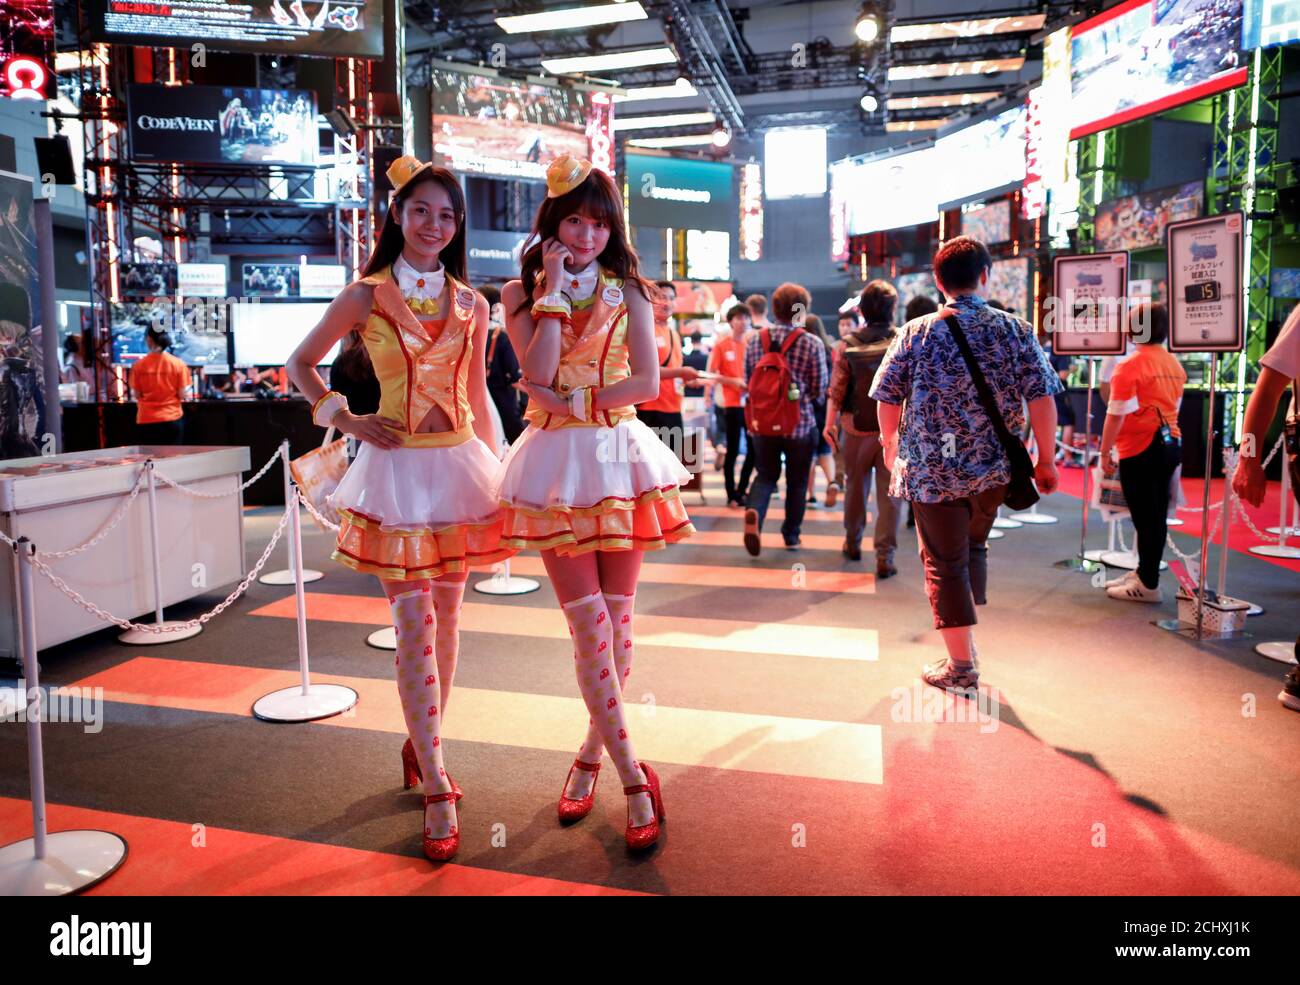 Models Pose At Bandai Namco Entertainment Booth At Tokyo Game Show 19 In Chiba East Of Tokyo Japan September 12 19 Reuters Issei Kato Stock Photo Alamy